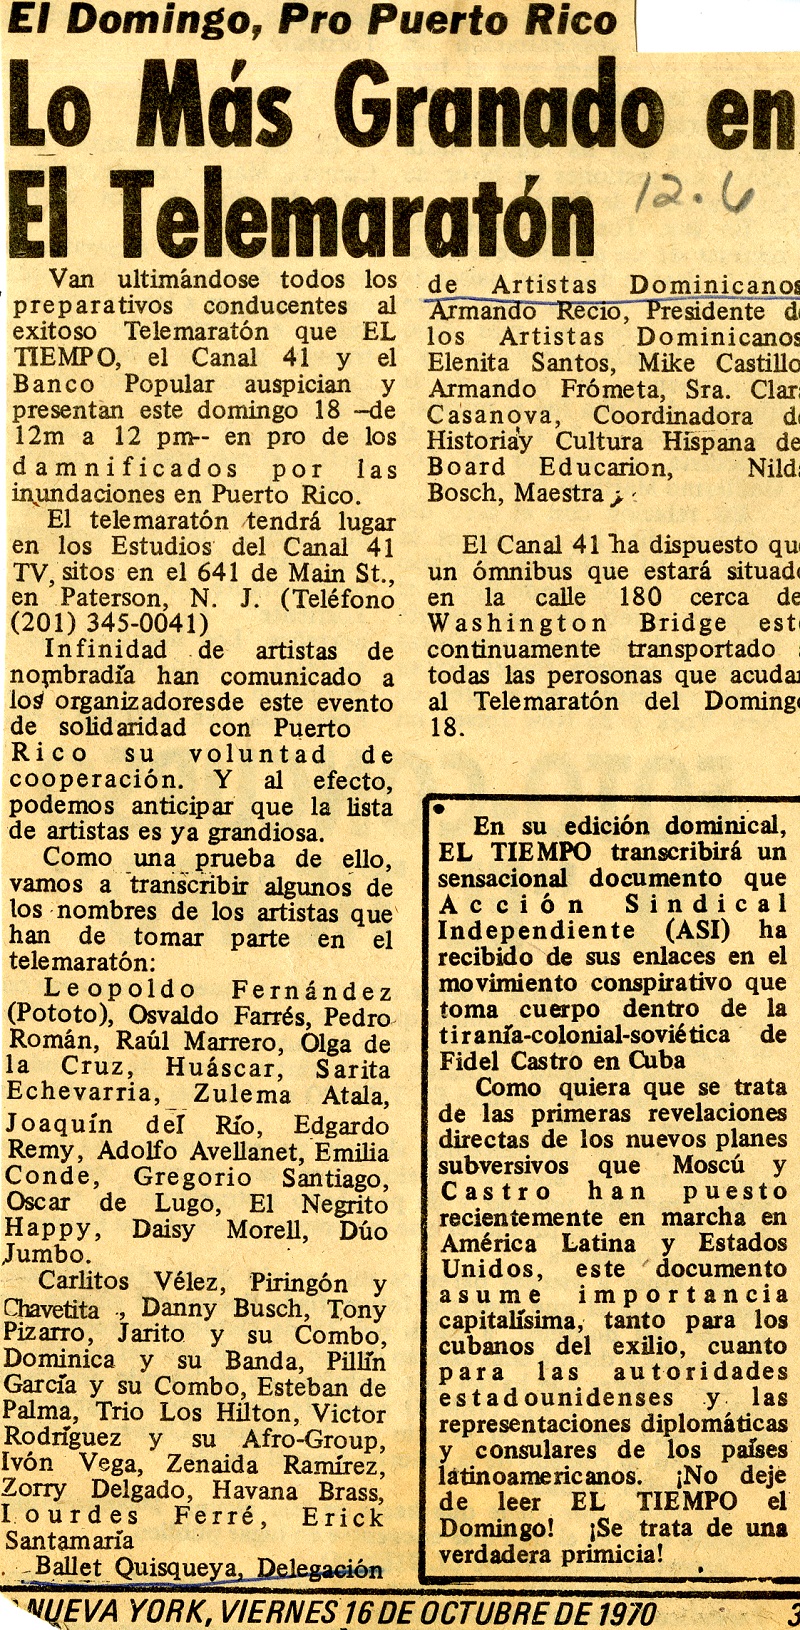 Telethon for Puerto Rico, October 16, 1970